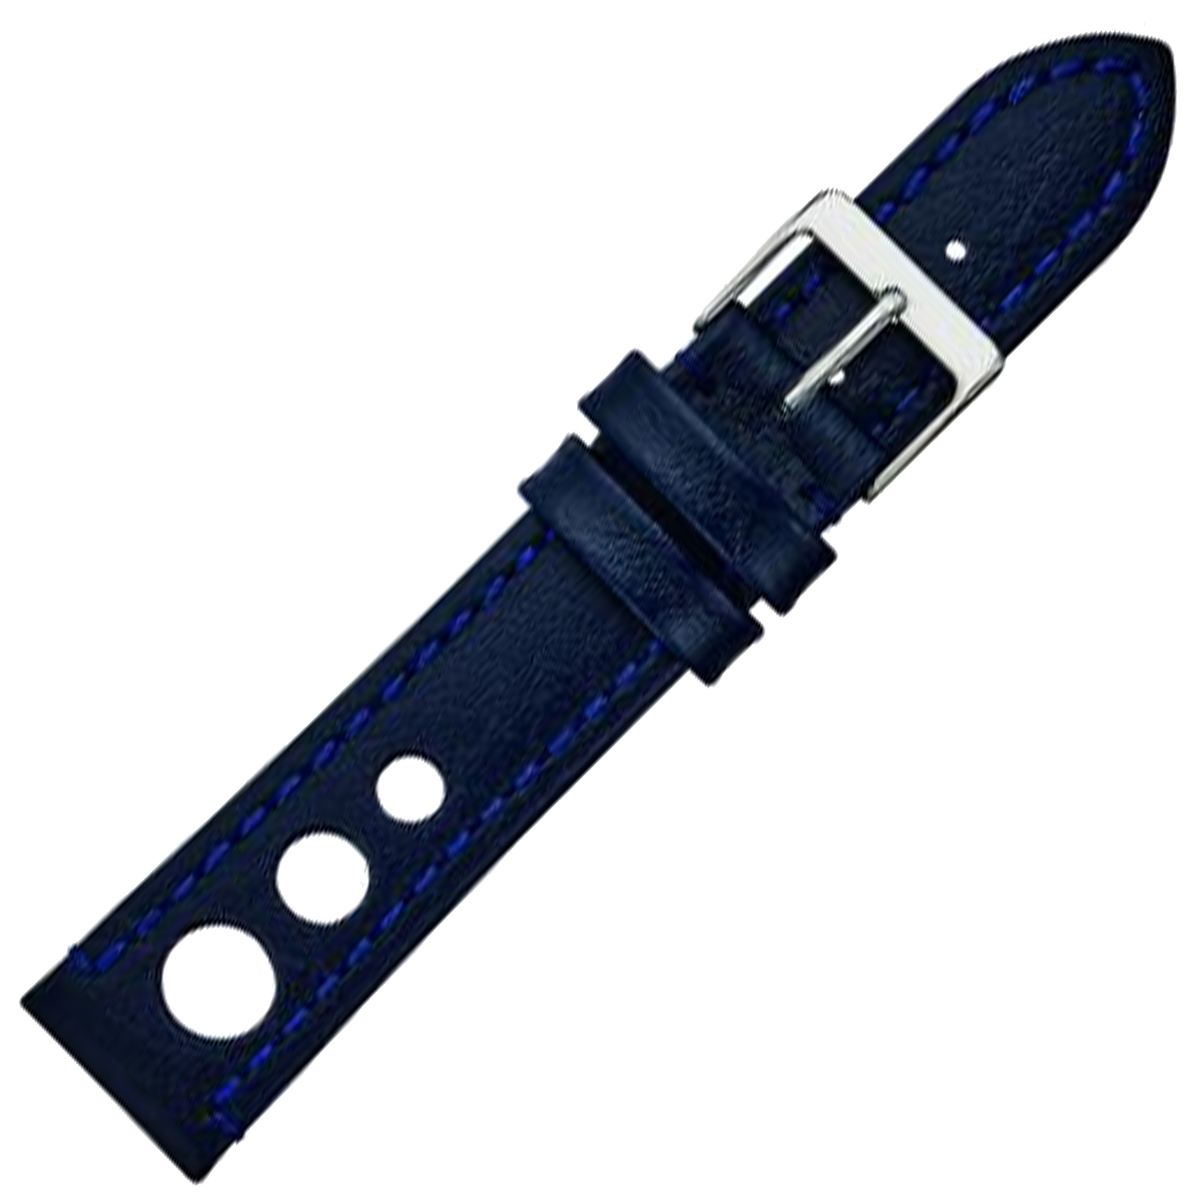 Alpine Leather Watchstrap - Flat Stitched Rally